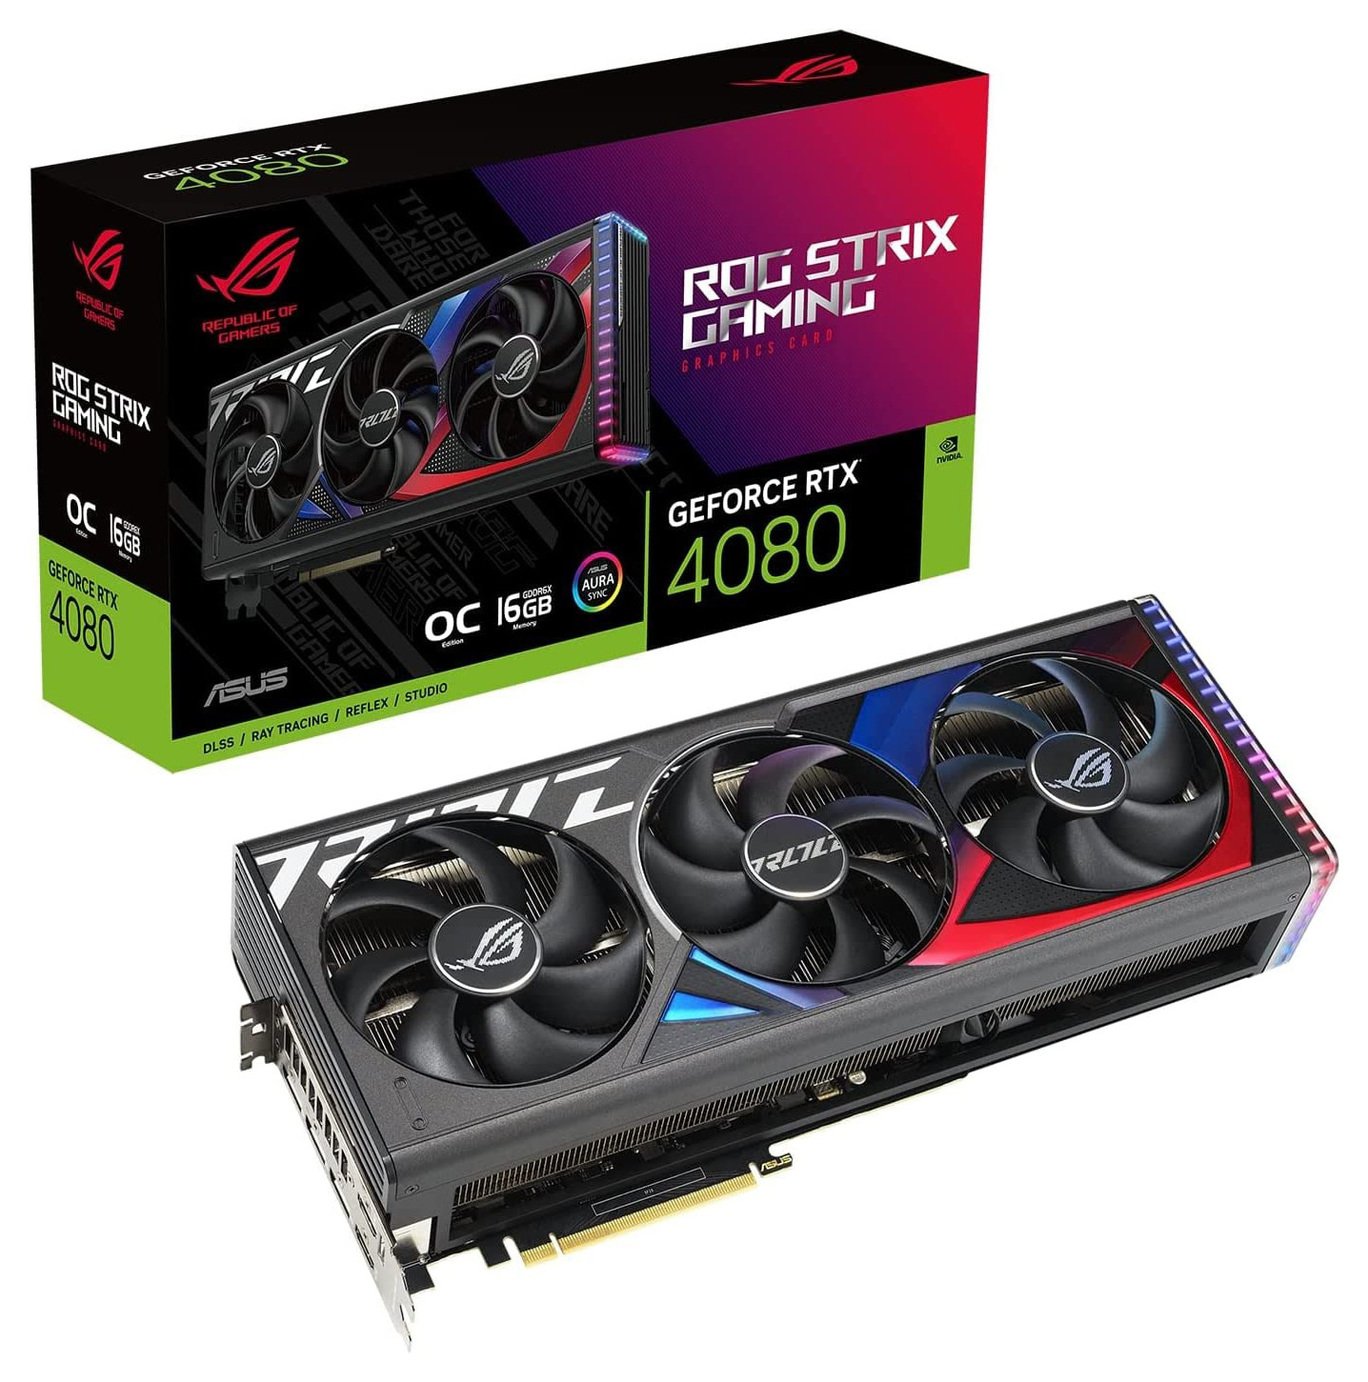 ASUS NVIDIA GeForce RTX 16GB 4080 Graphic Card